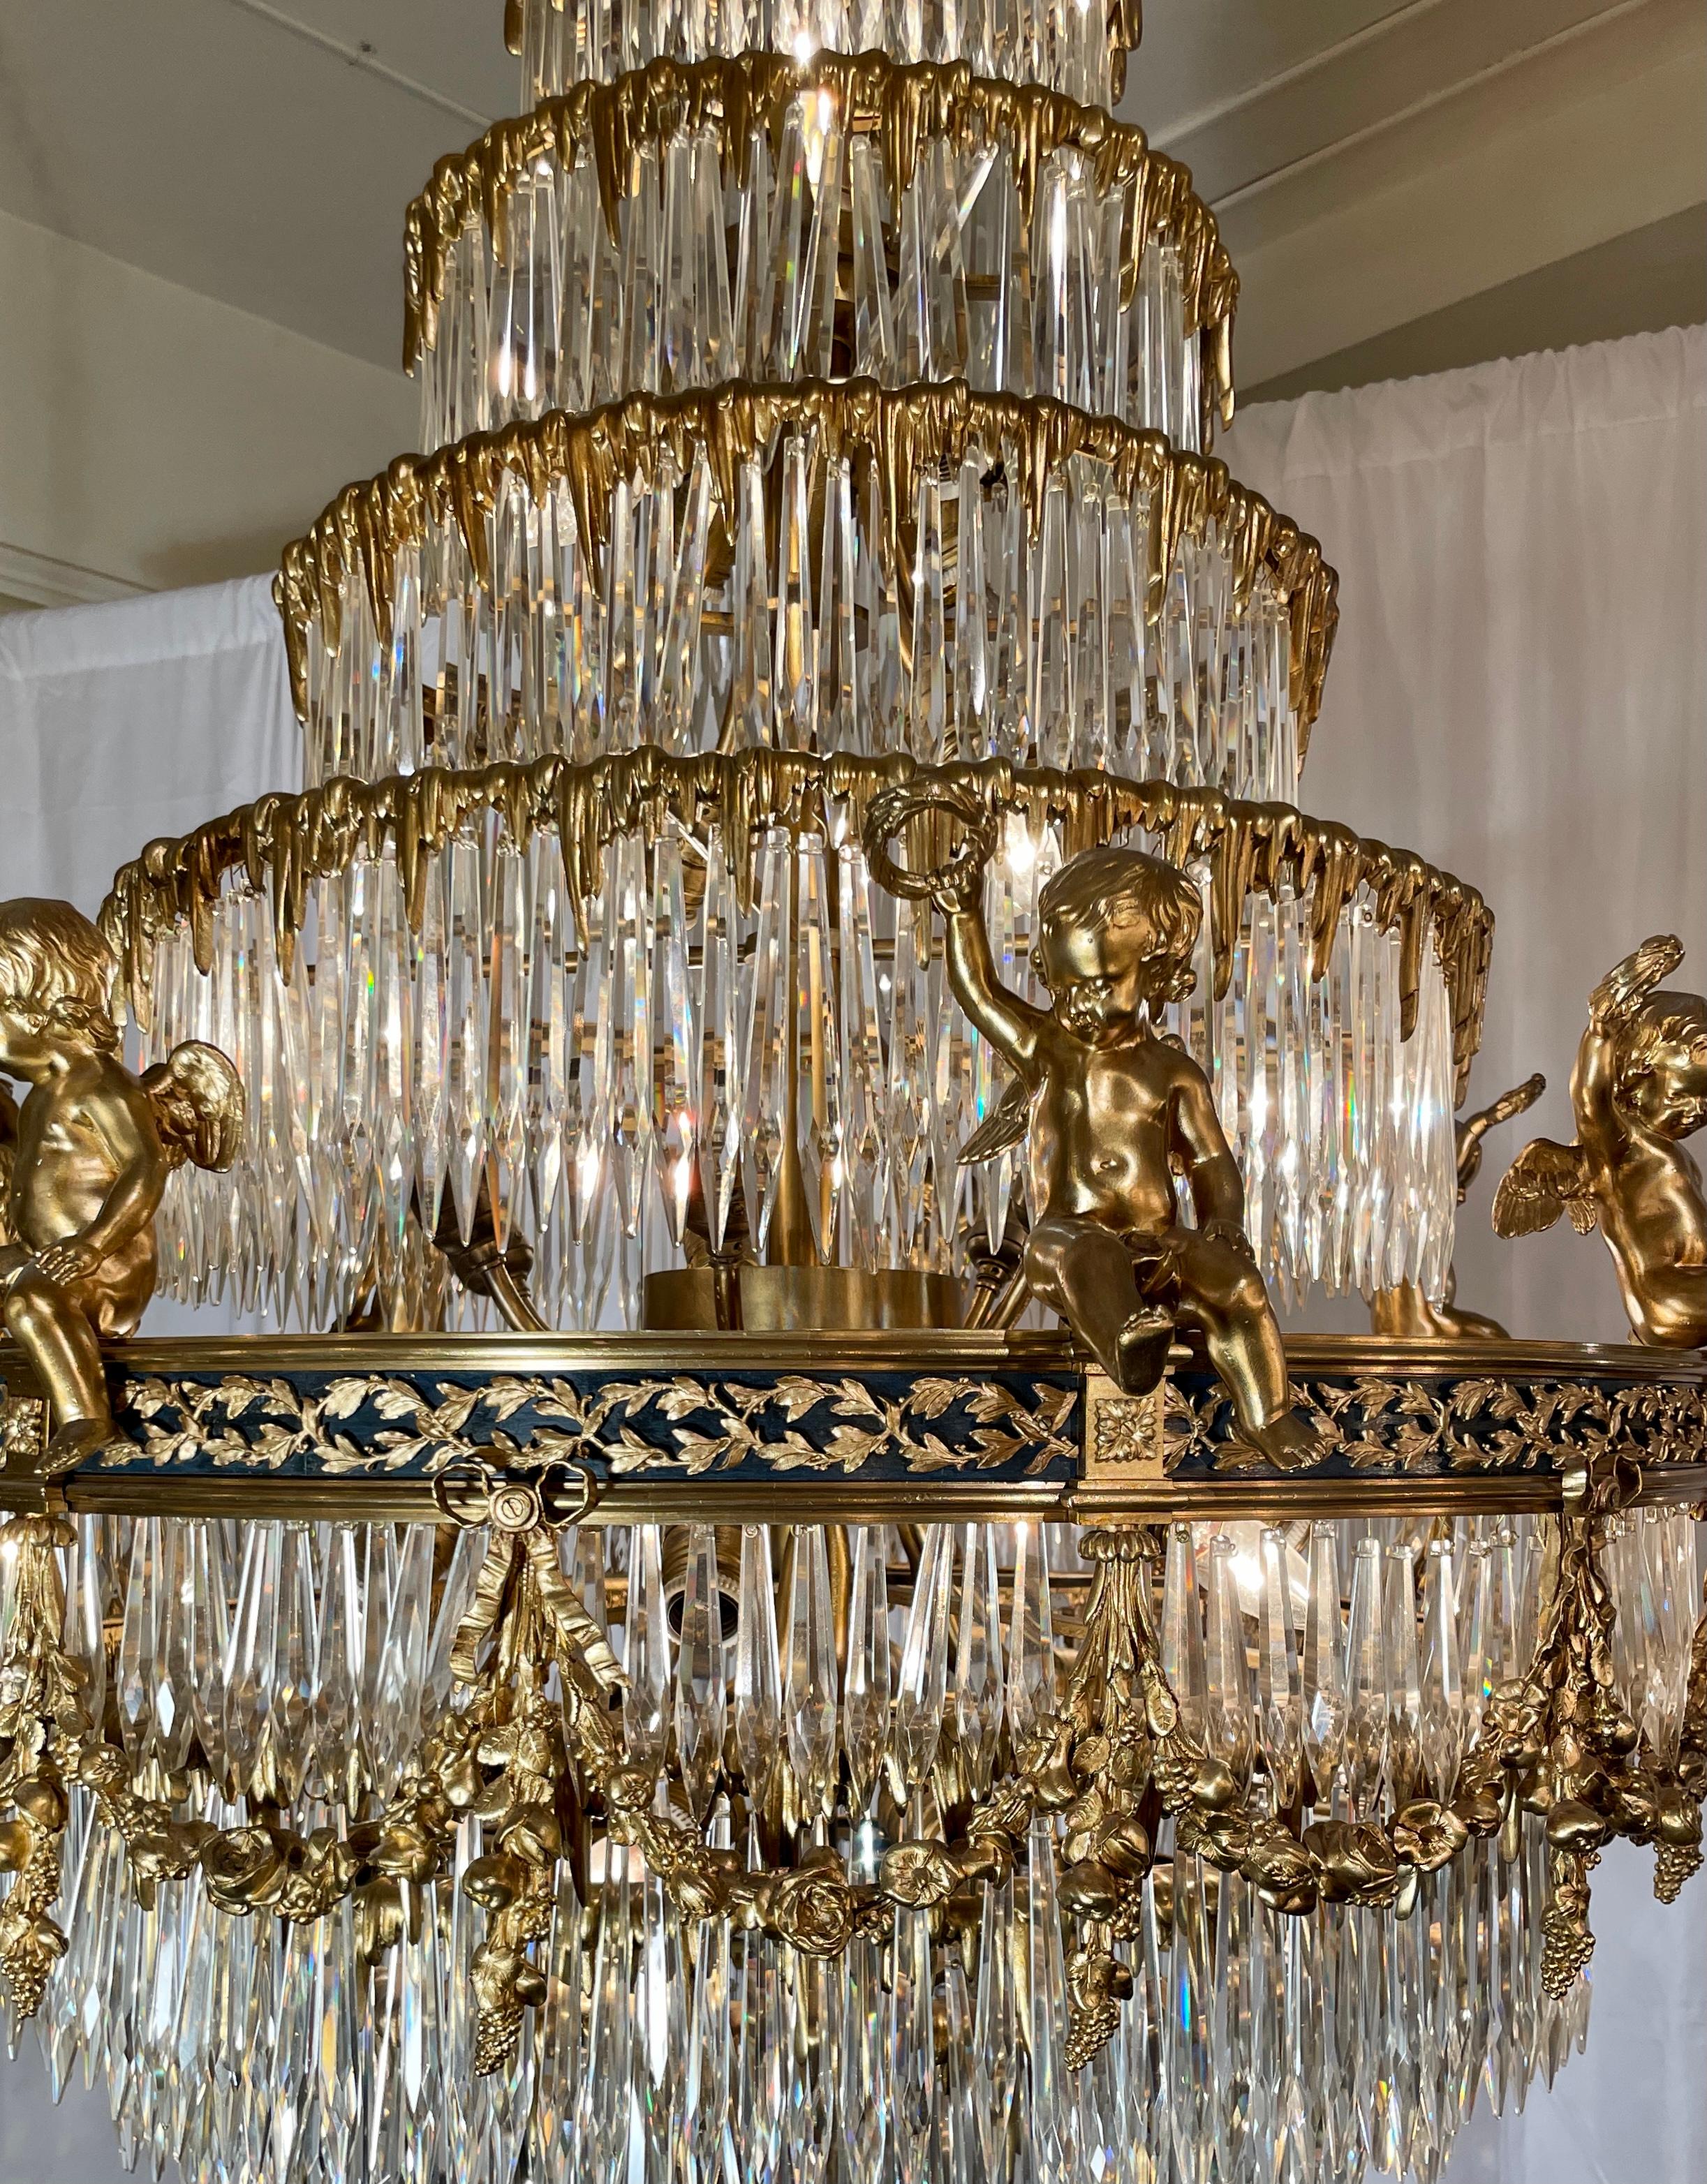 Antique French Baccarat Crystal & Bronze D'Ore Waterfall Chandelier, Circa 1880s For Sale 2